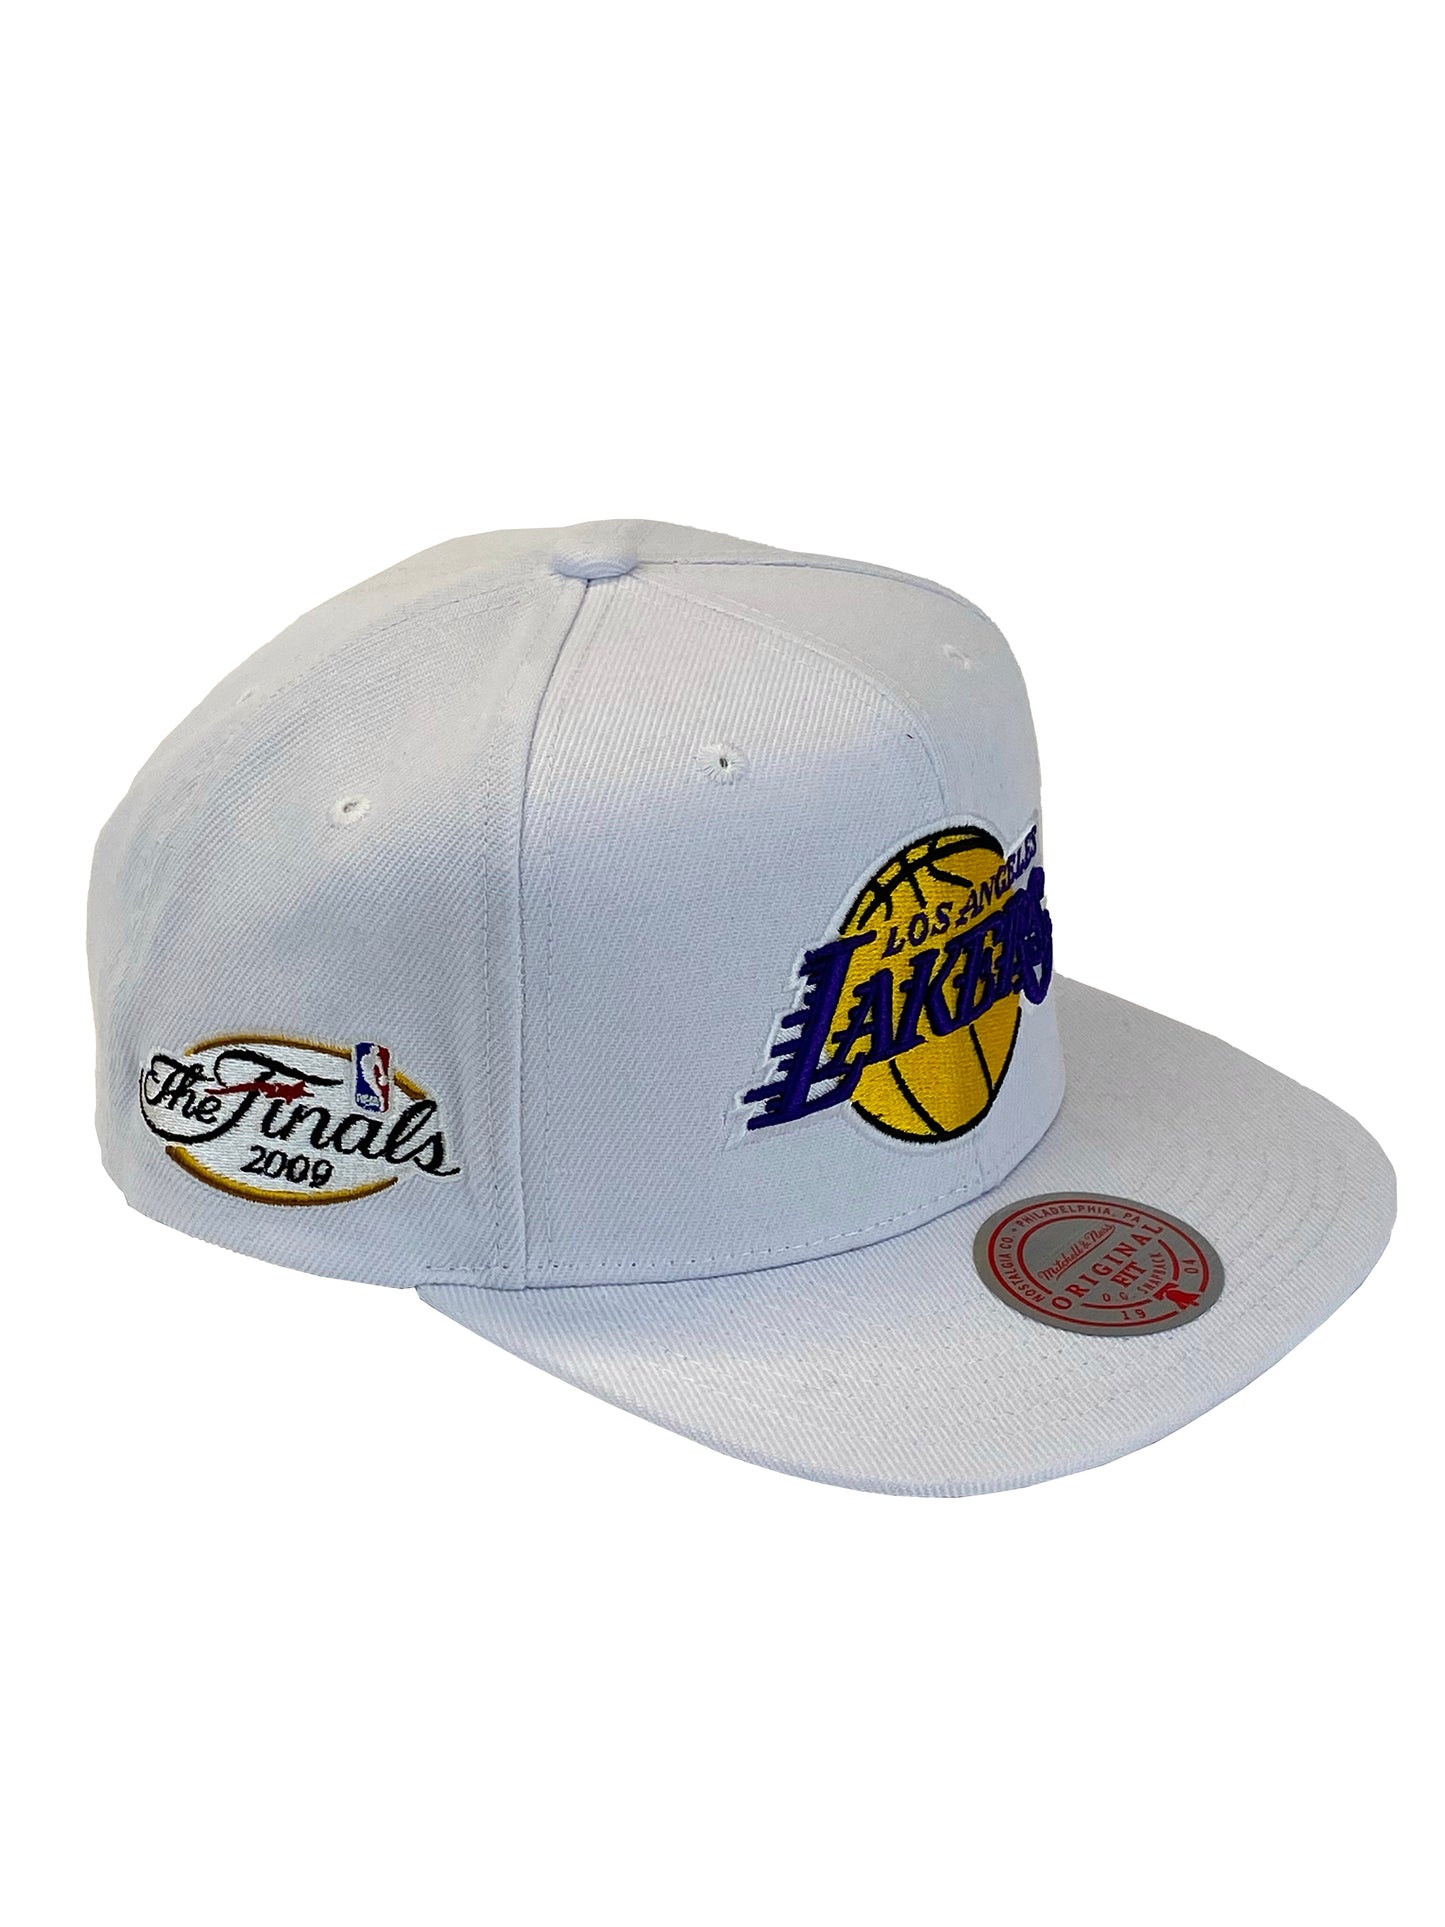 lakers nba finals patch